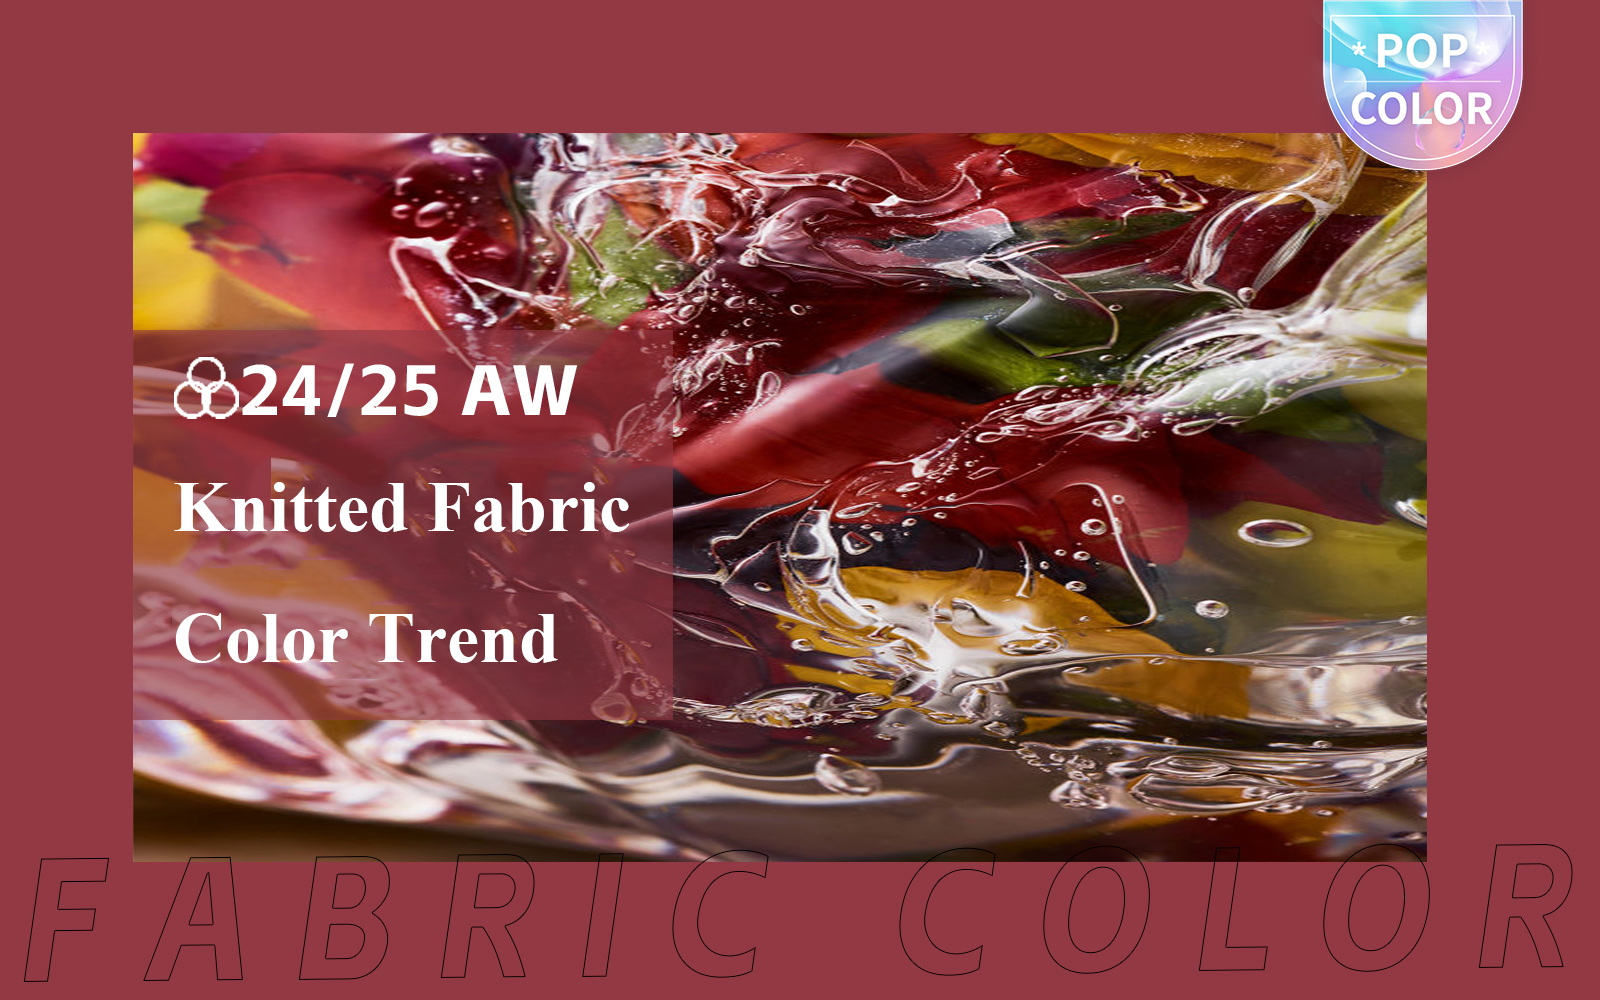 The Color Trend Prediction of Knitted Fabric